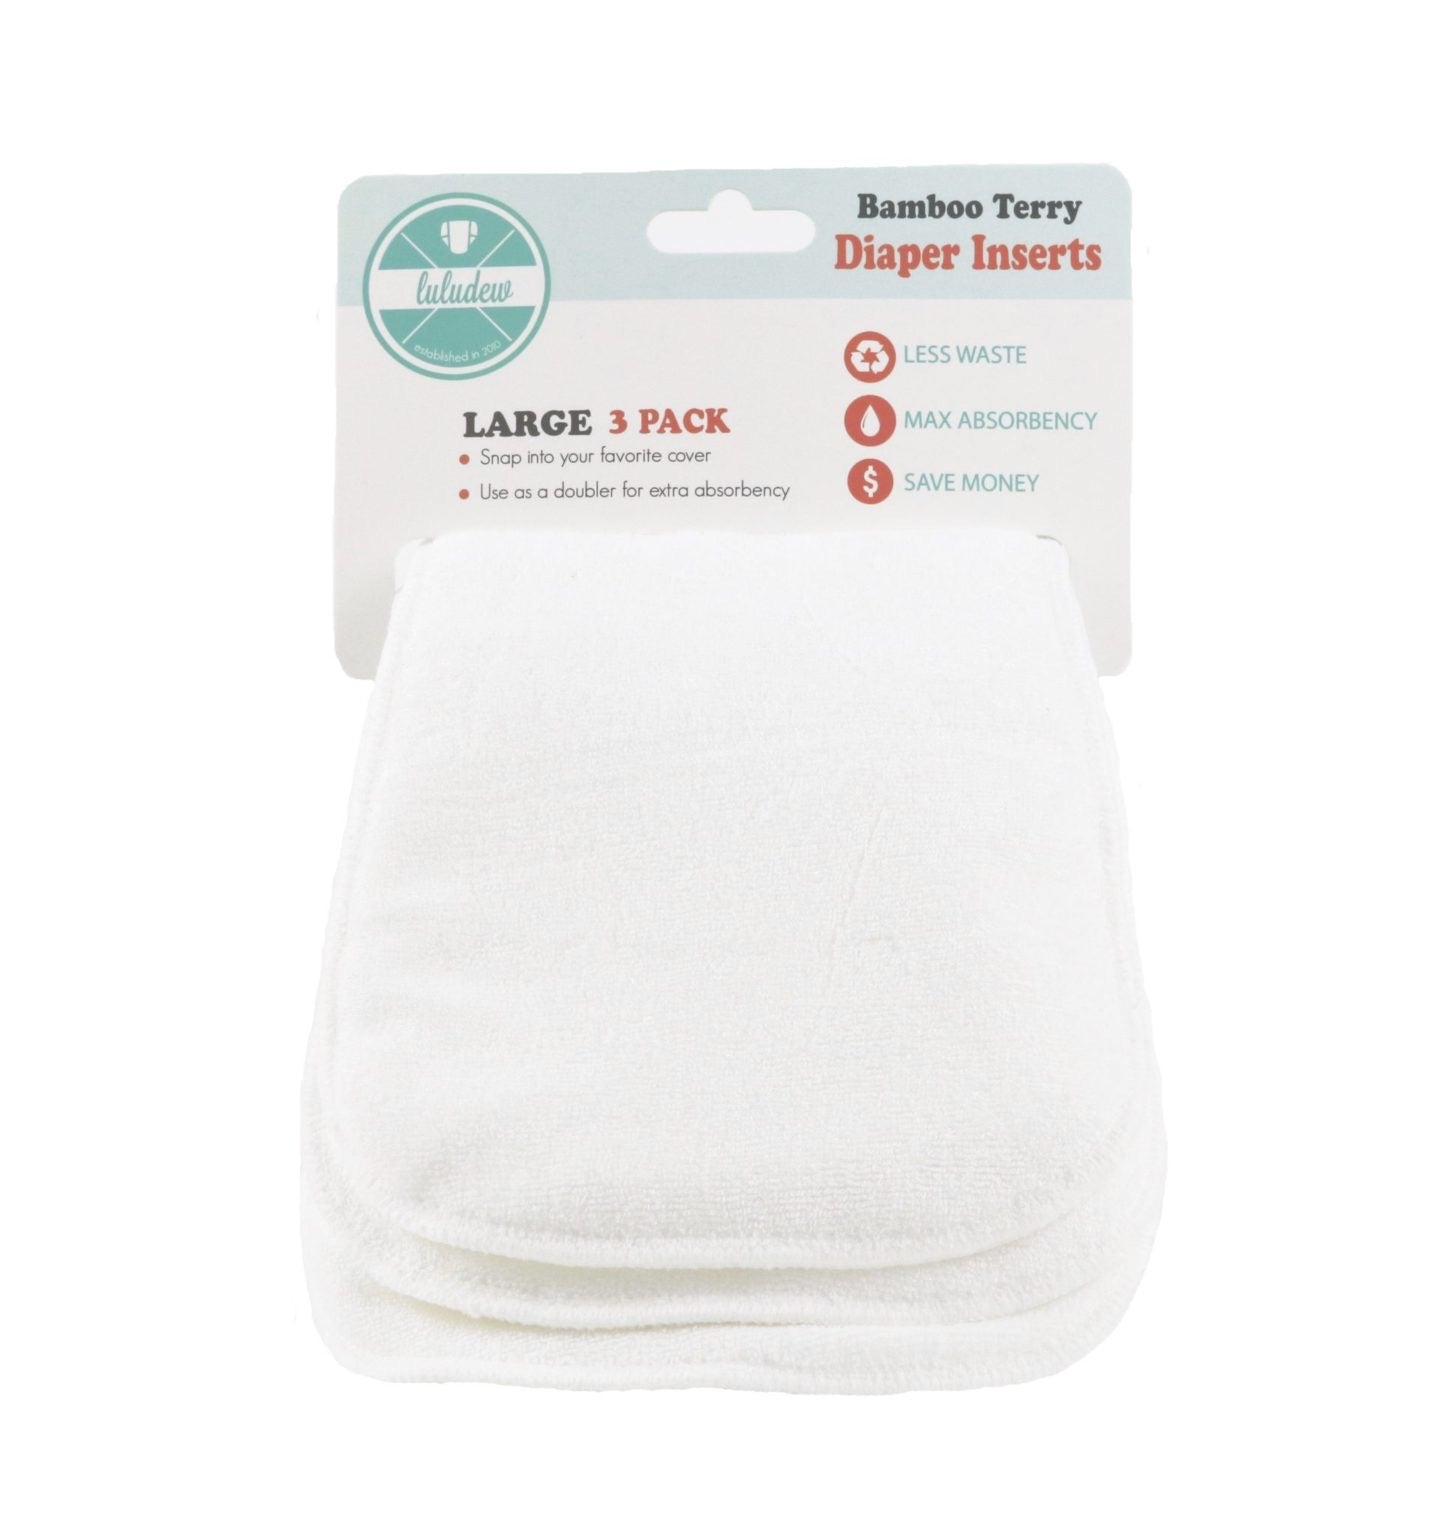 Luludew- Bamboo Terry Inserts (3 pack)